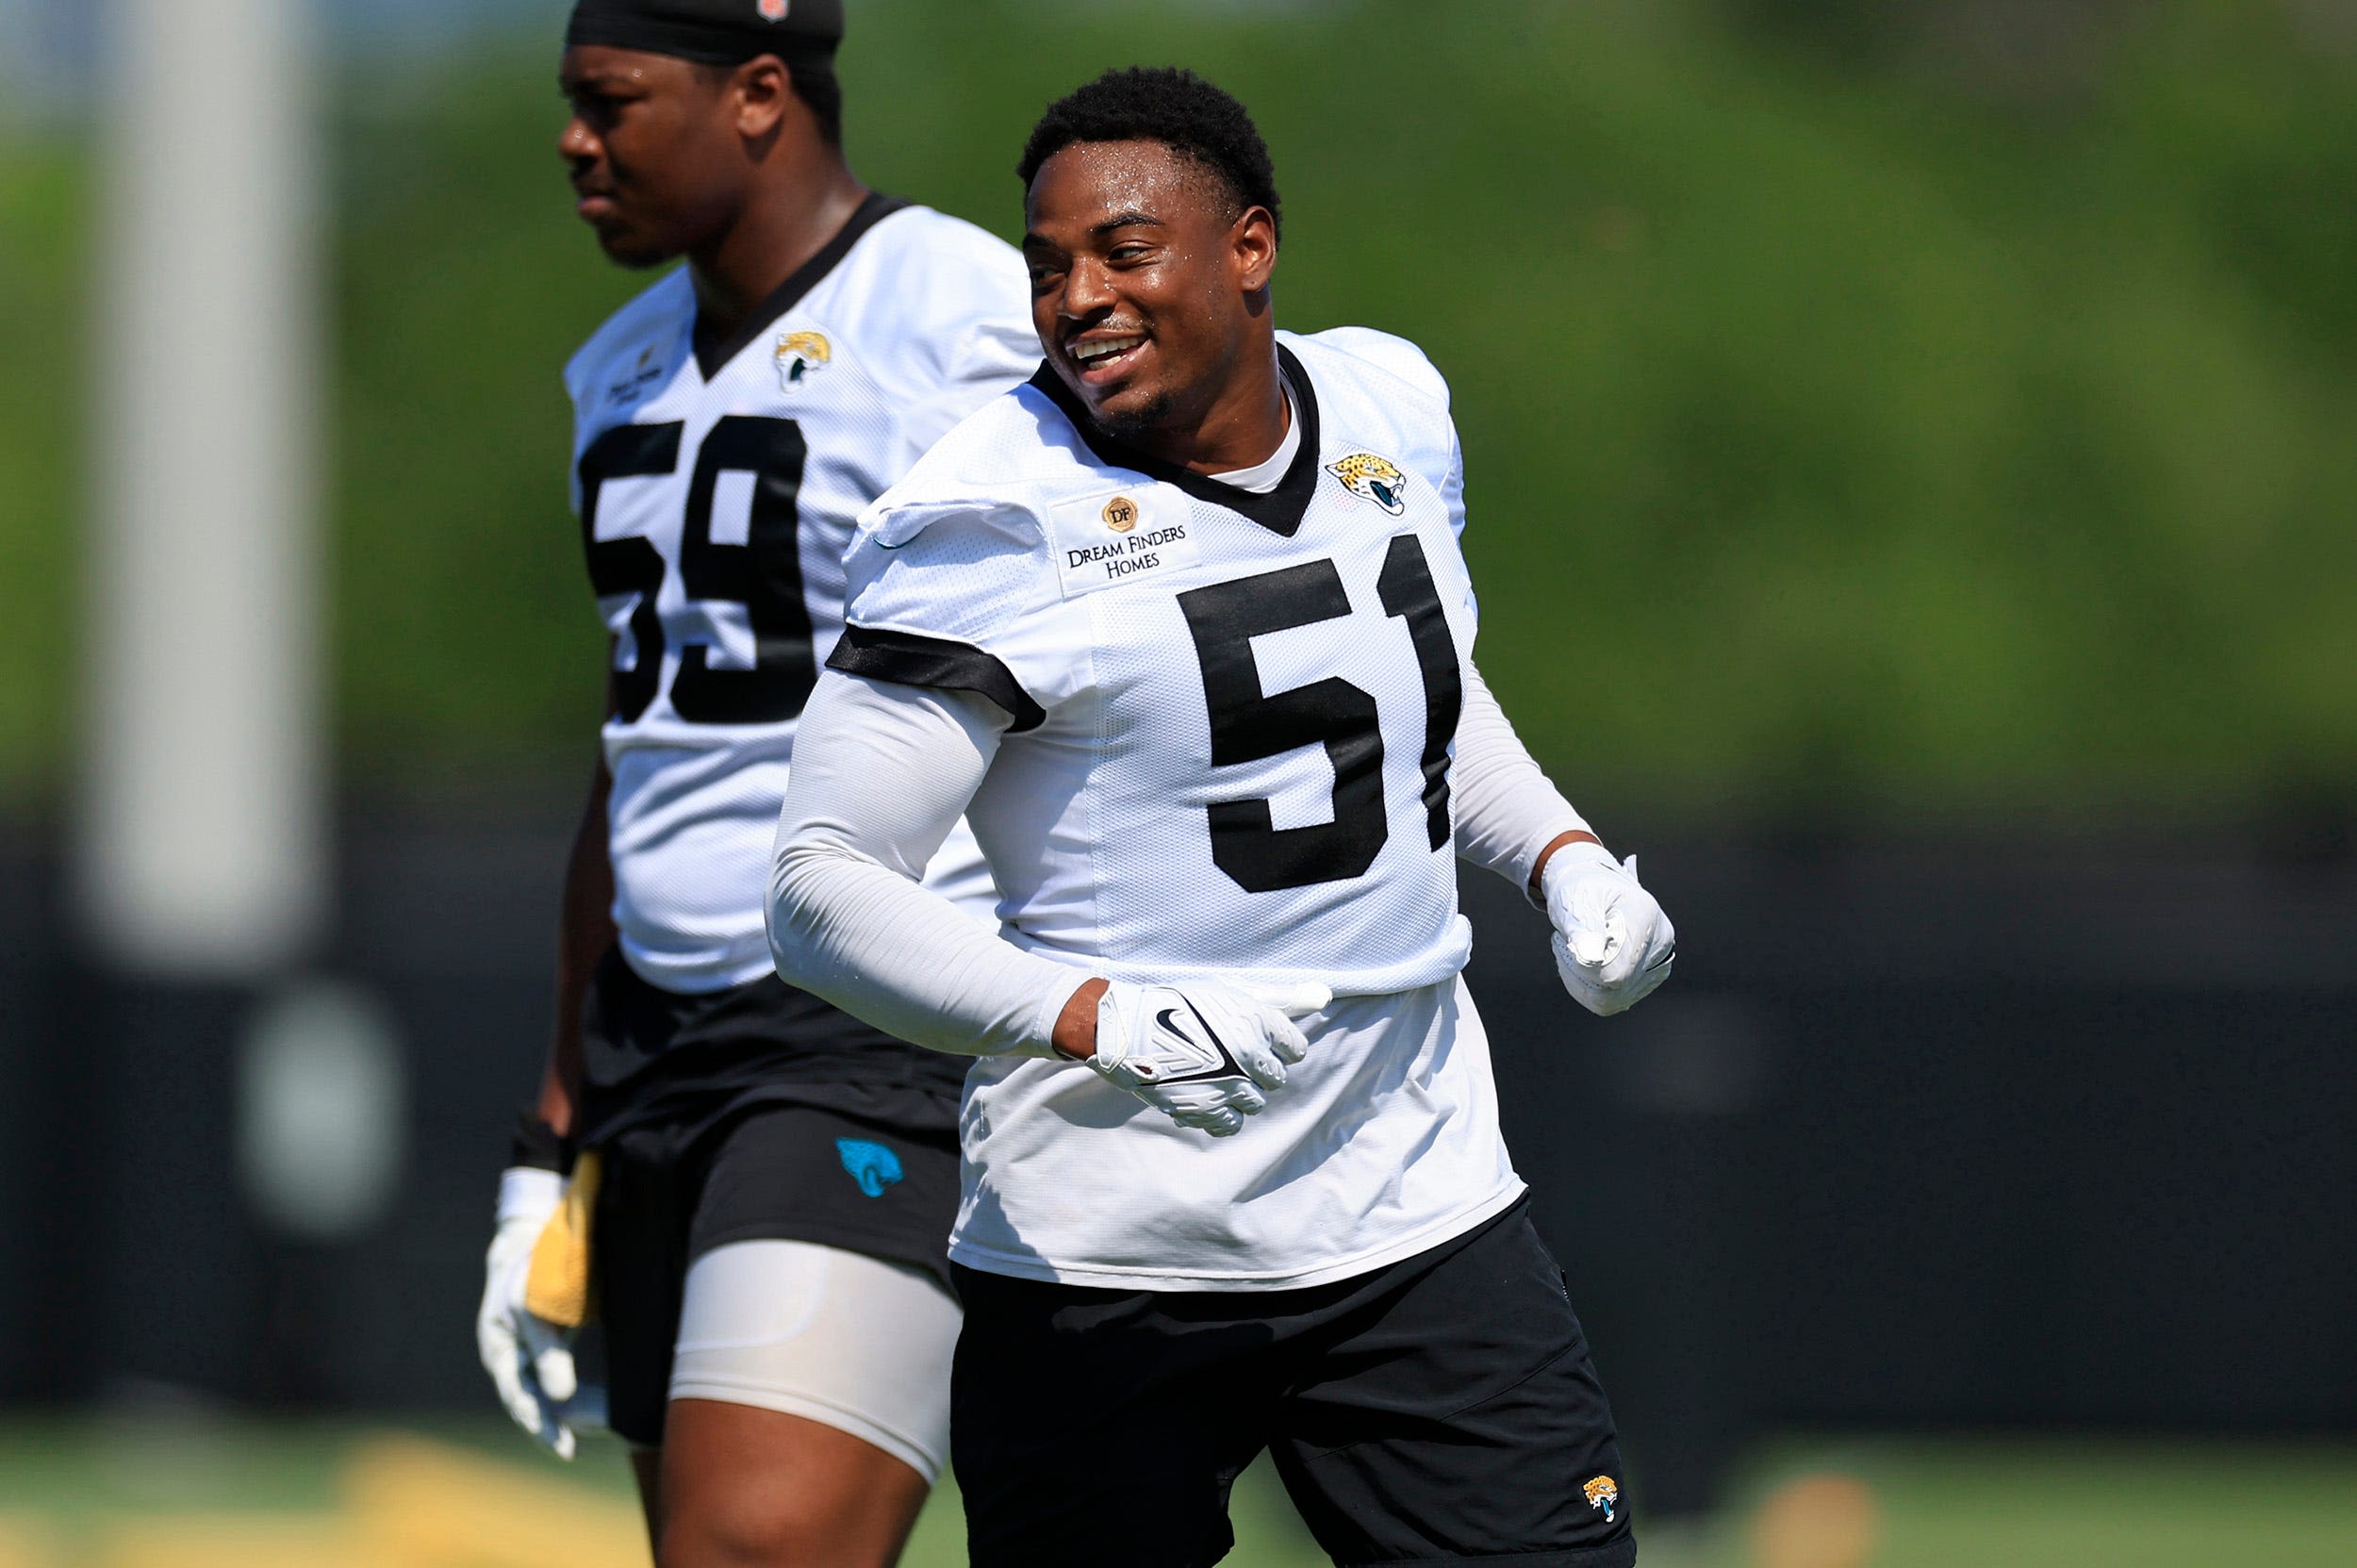 Jaguars second-year linebacker Ventrell Miller battling back — once again — from an injury